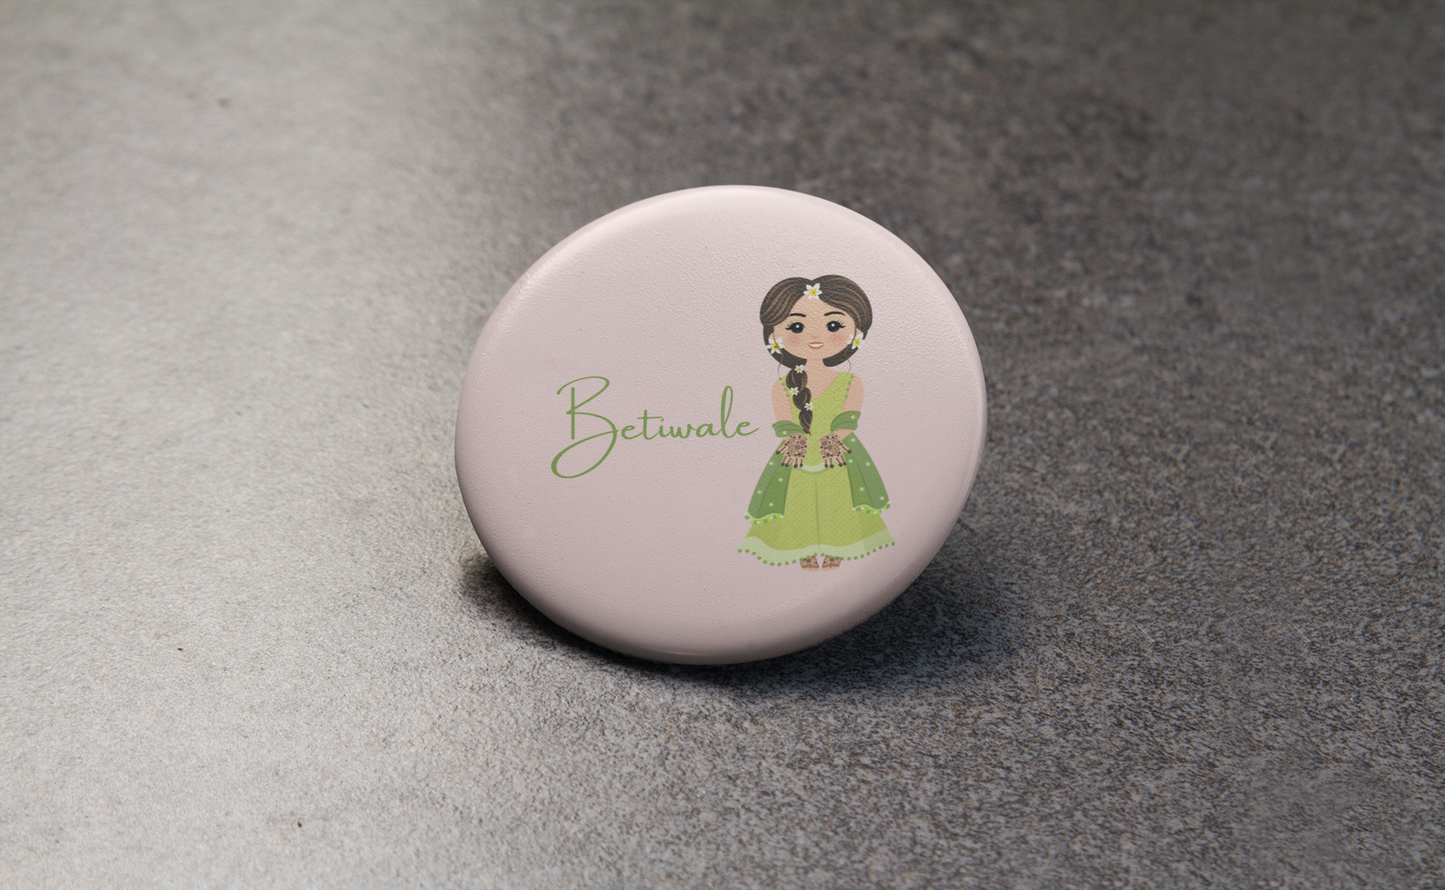 Betiwale! Pin Button Badge - Pack of 1